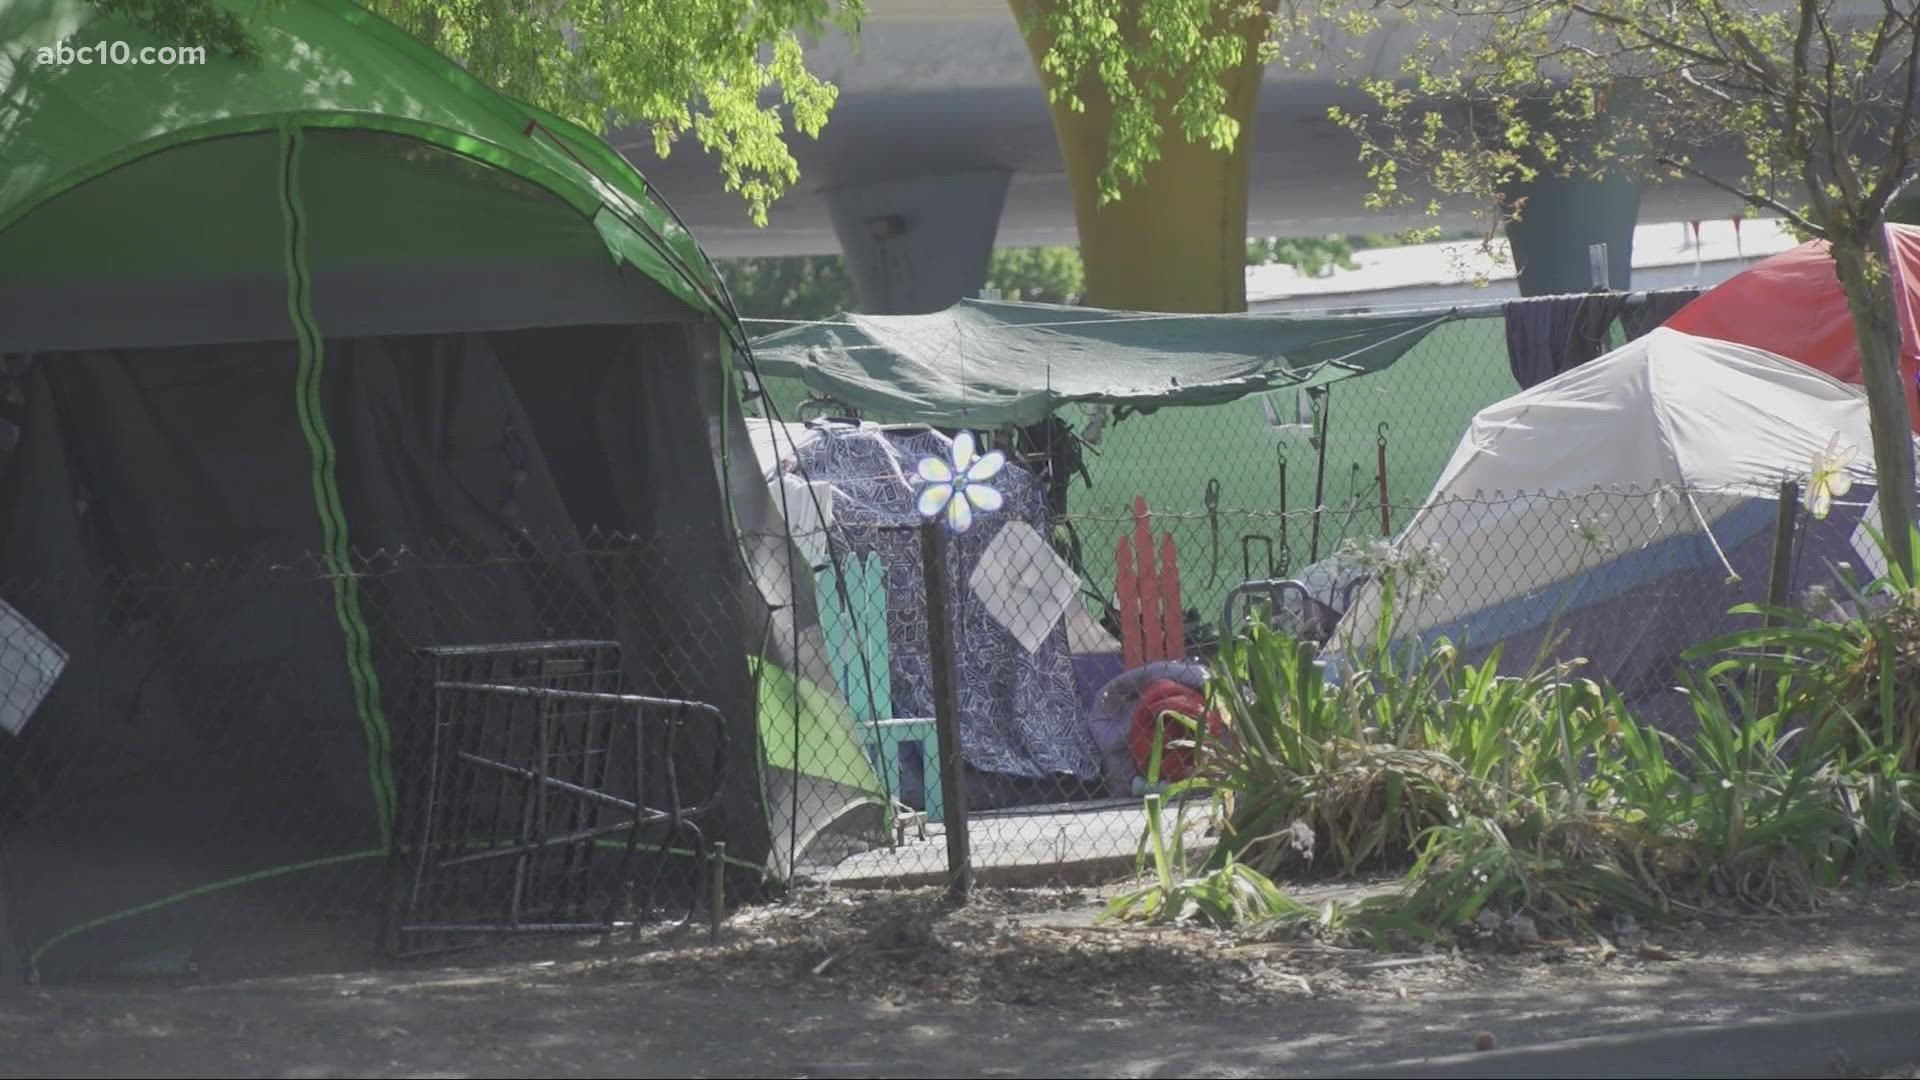 The city reveals the first of the 20 temporary homeless shelters